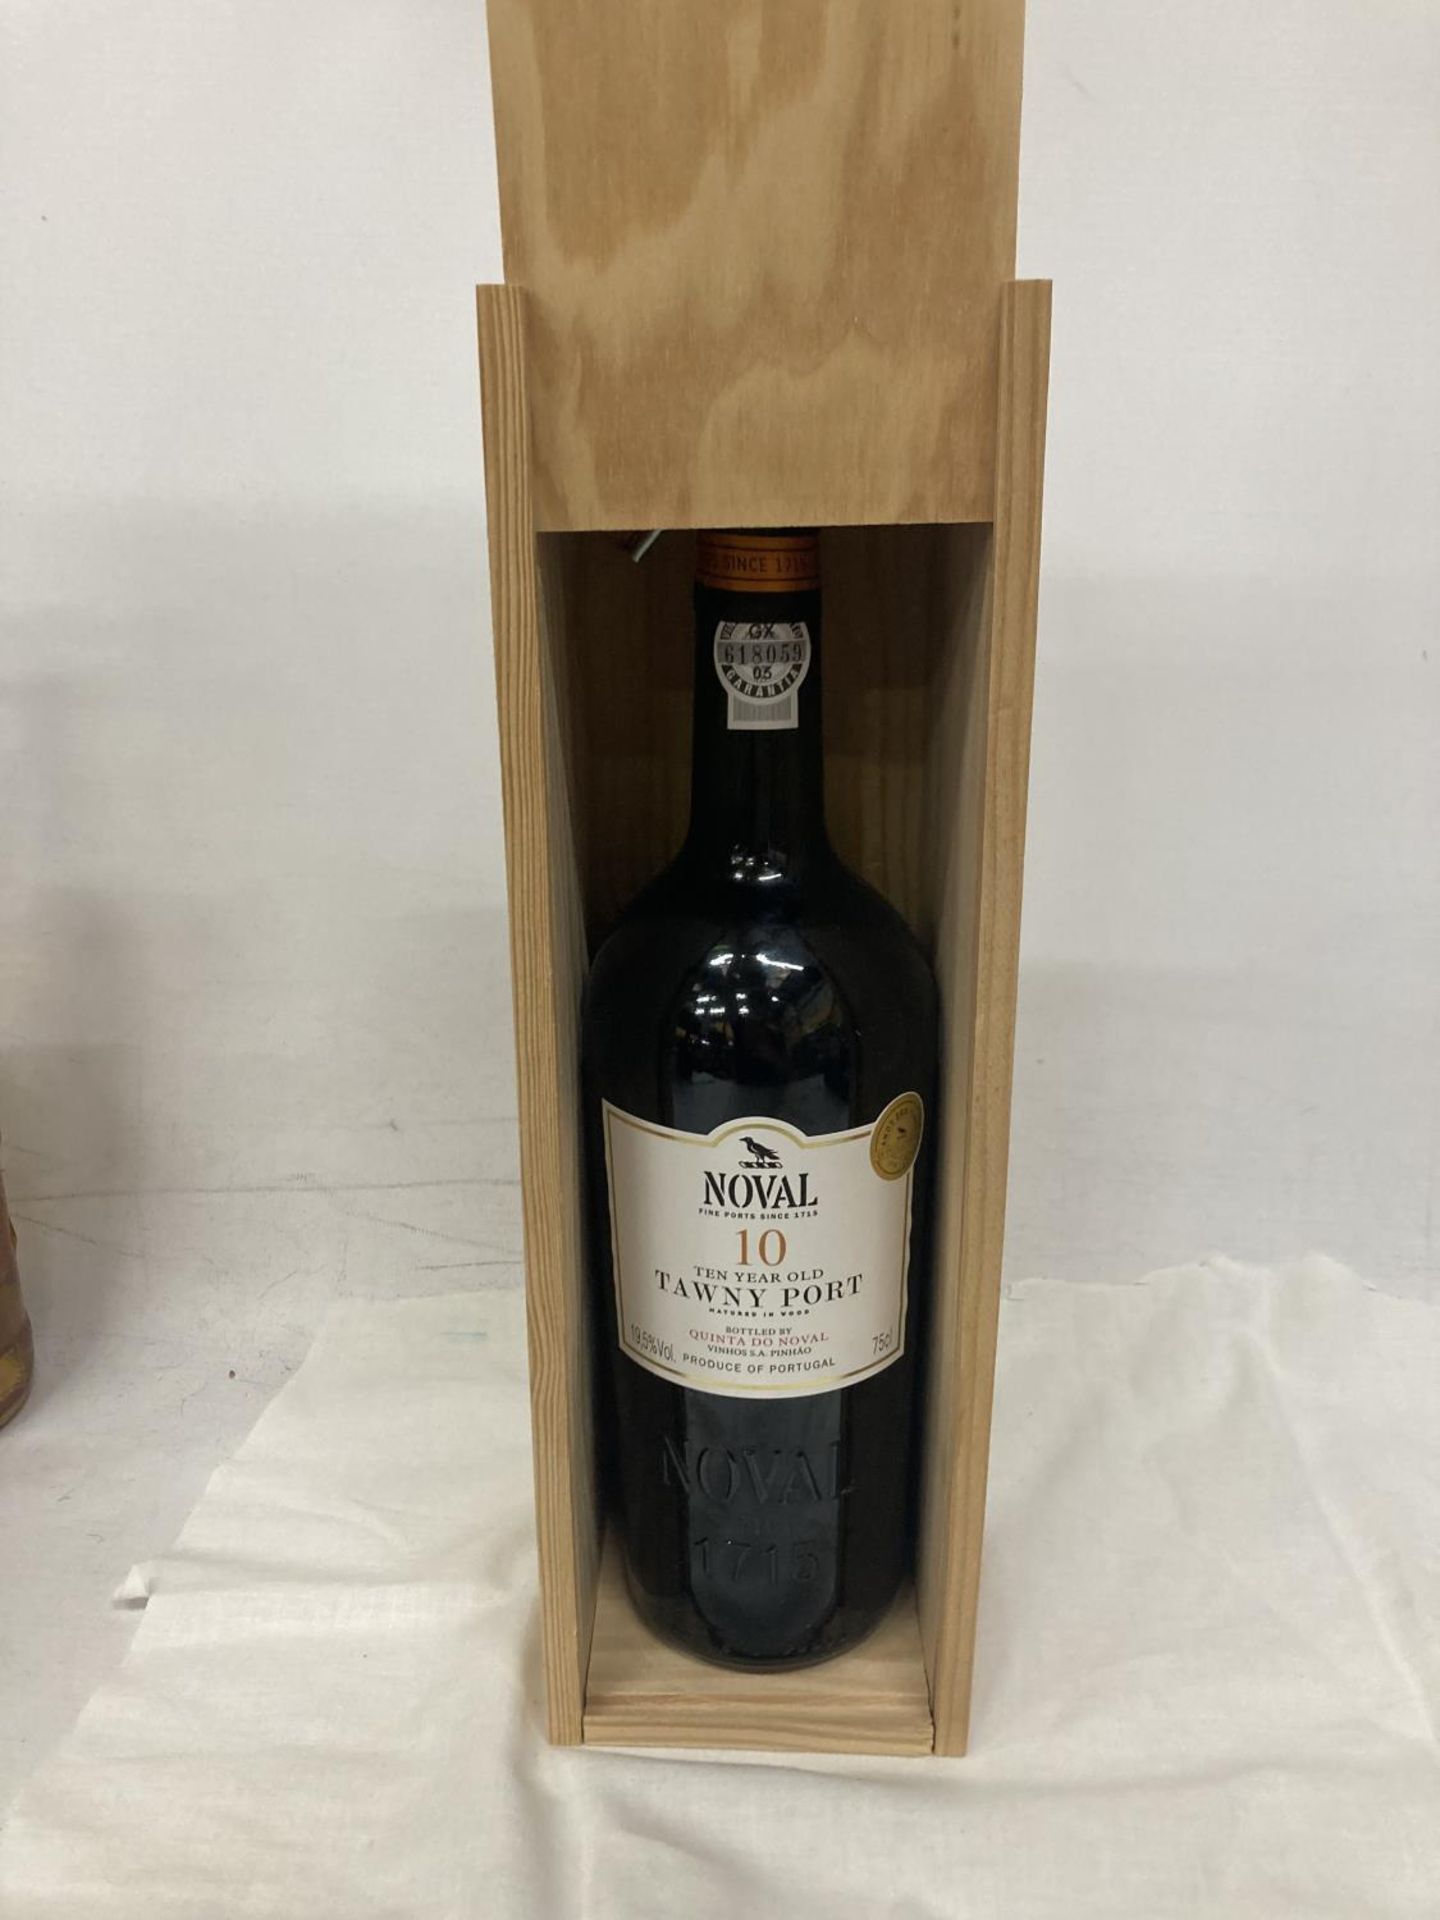 A 75CL BOTTLE OF NOVAL 10 YEAR OLD TAWNY PORT IN A WOODEN BOX - Image 4 of 4